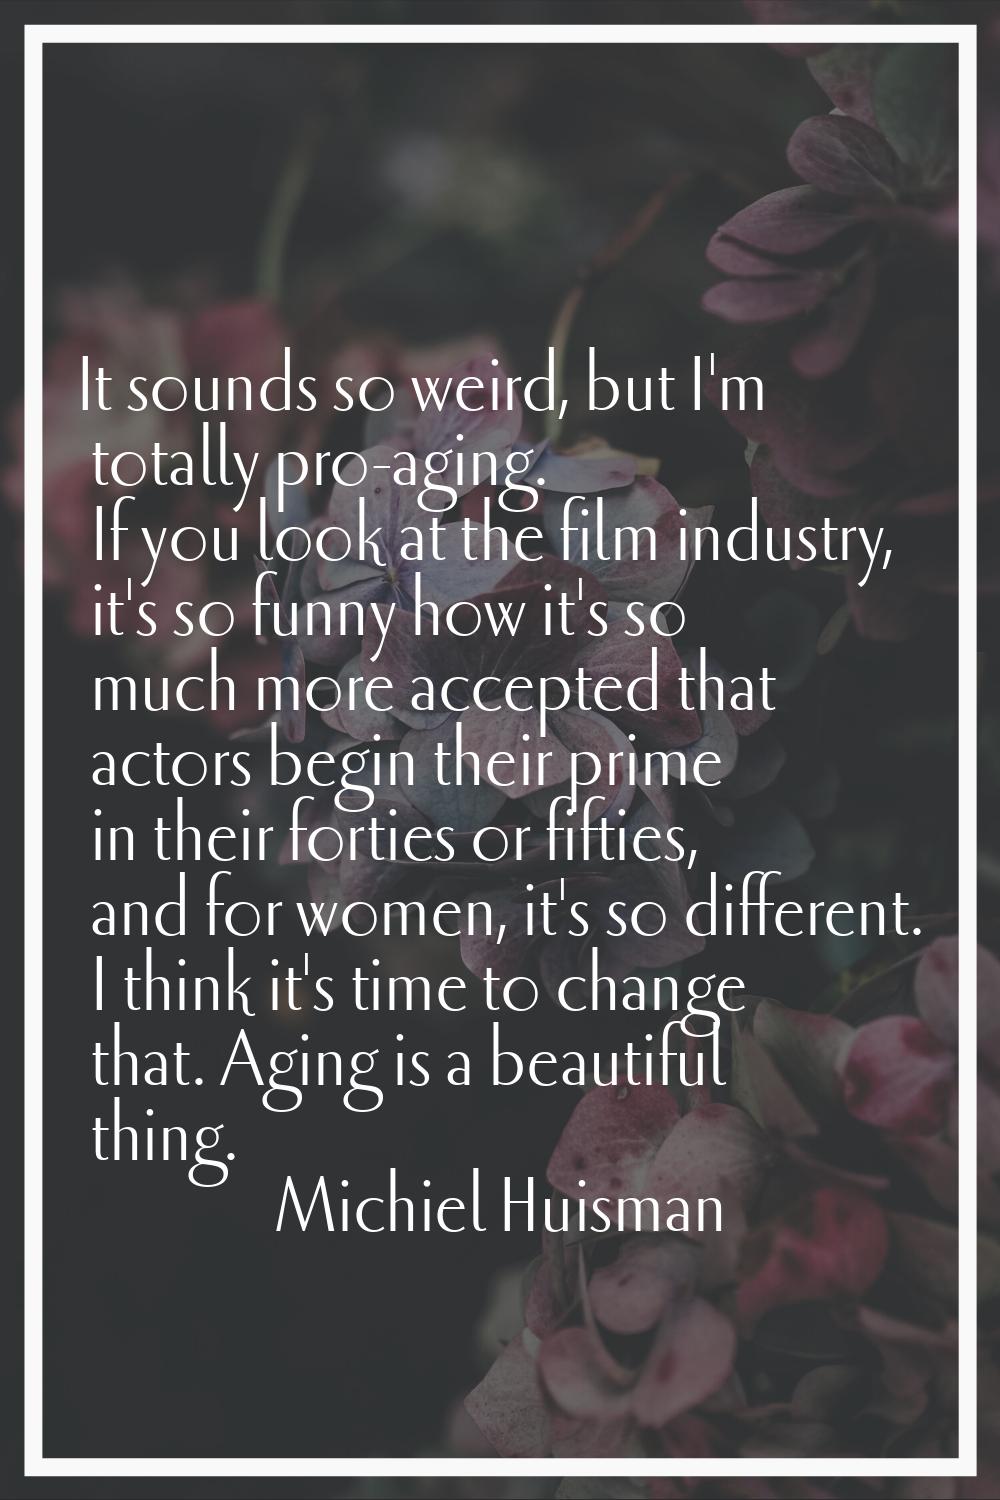 It sounds so weird, but I'm totally pro-aging. If you look at the film industry, it's so funny how 